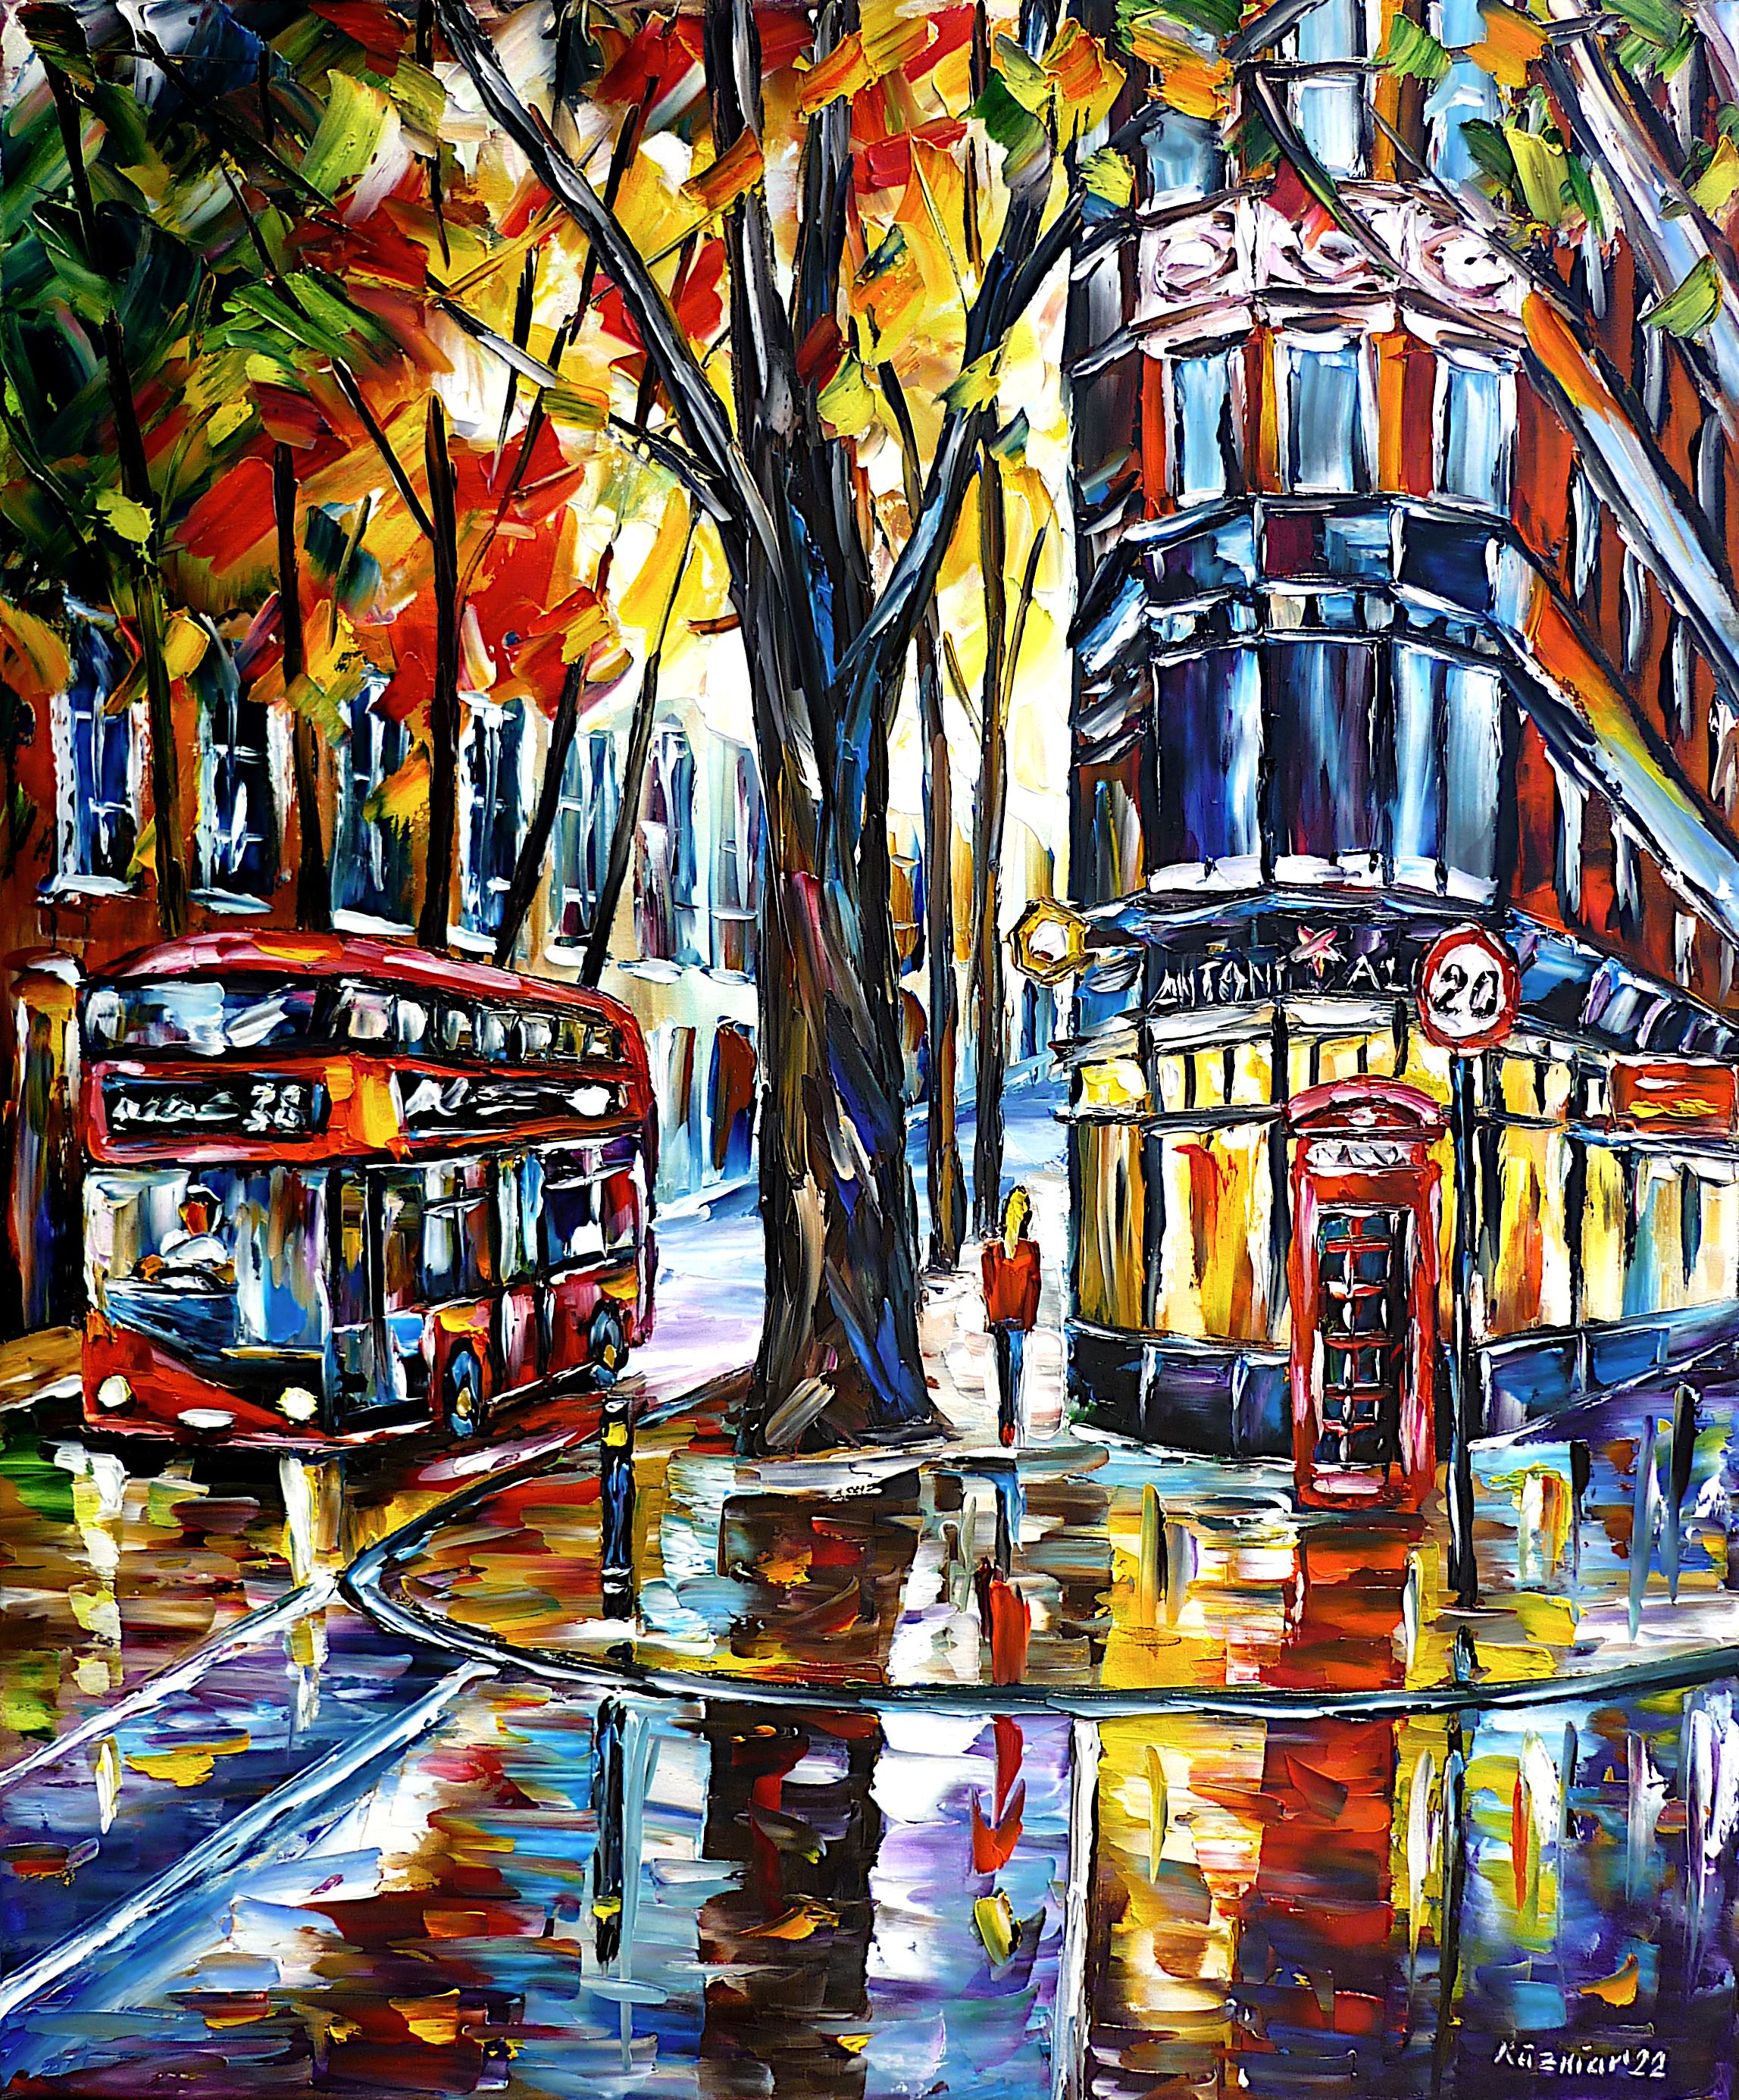 london in autumn,london city scene,london city painting,london bus,double-decker bus,london bus route 38,Piccadilly Circus,london autumn impression,london phone booth,red phone box,city in autumn,lonely woman walking,on the corner,Antoni and Alison,43 Rosebery Ave,London EC1R 4SH,beautiful london,autumn mood,autumn trees,london love,london lovers,i love london,london colorful,london abstract,london's beauty,london boutique,autumn colors,lively autumn,colorful autumn,autumn beauty,autumn painting,colorful picture,colorful painting,palette knife oil painting,modern art,impressionism,abstract painting,lively colors,colorful painting,bright colors,light reflections,impasto painting,figurative